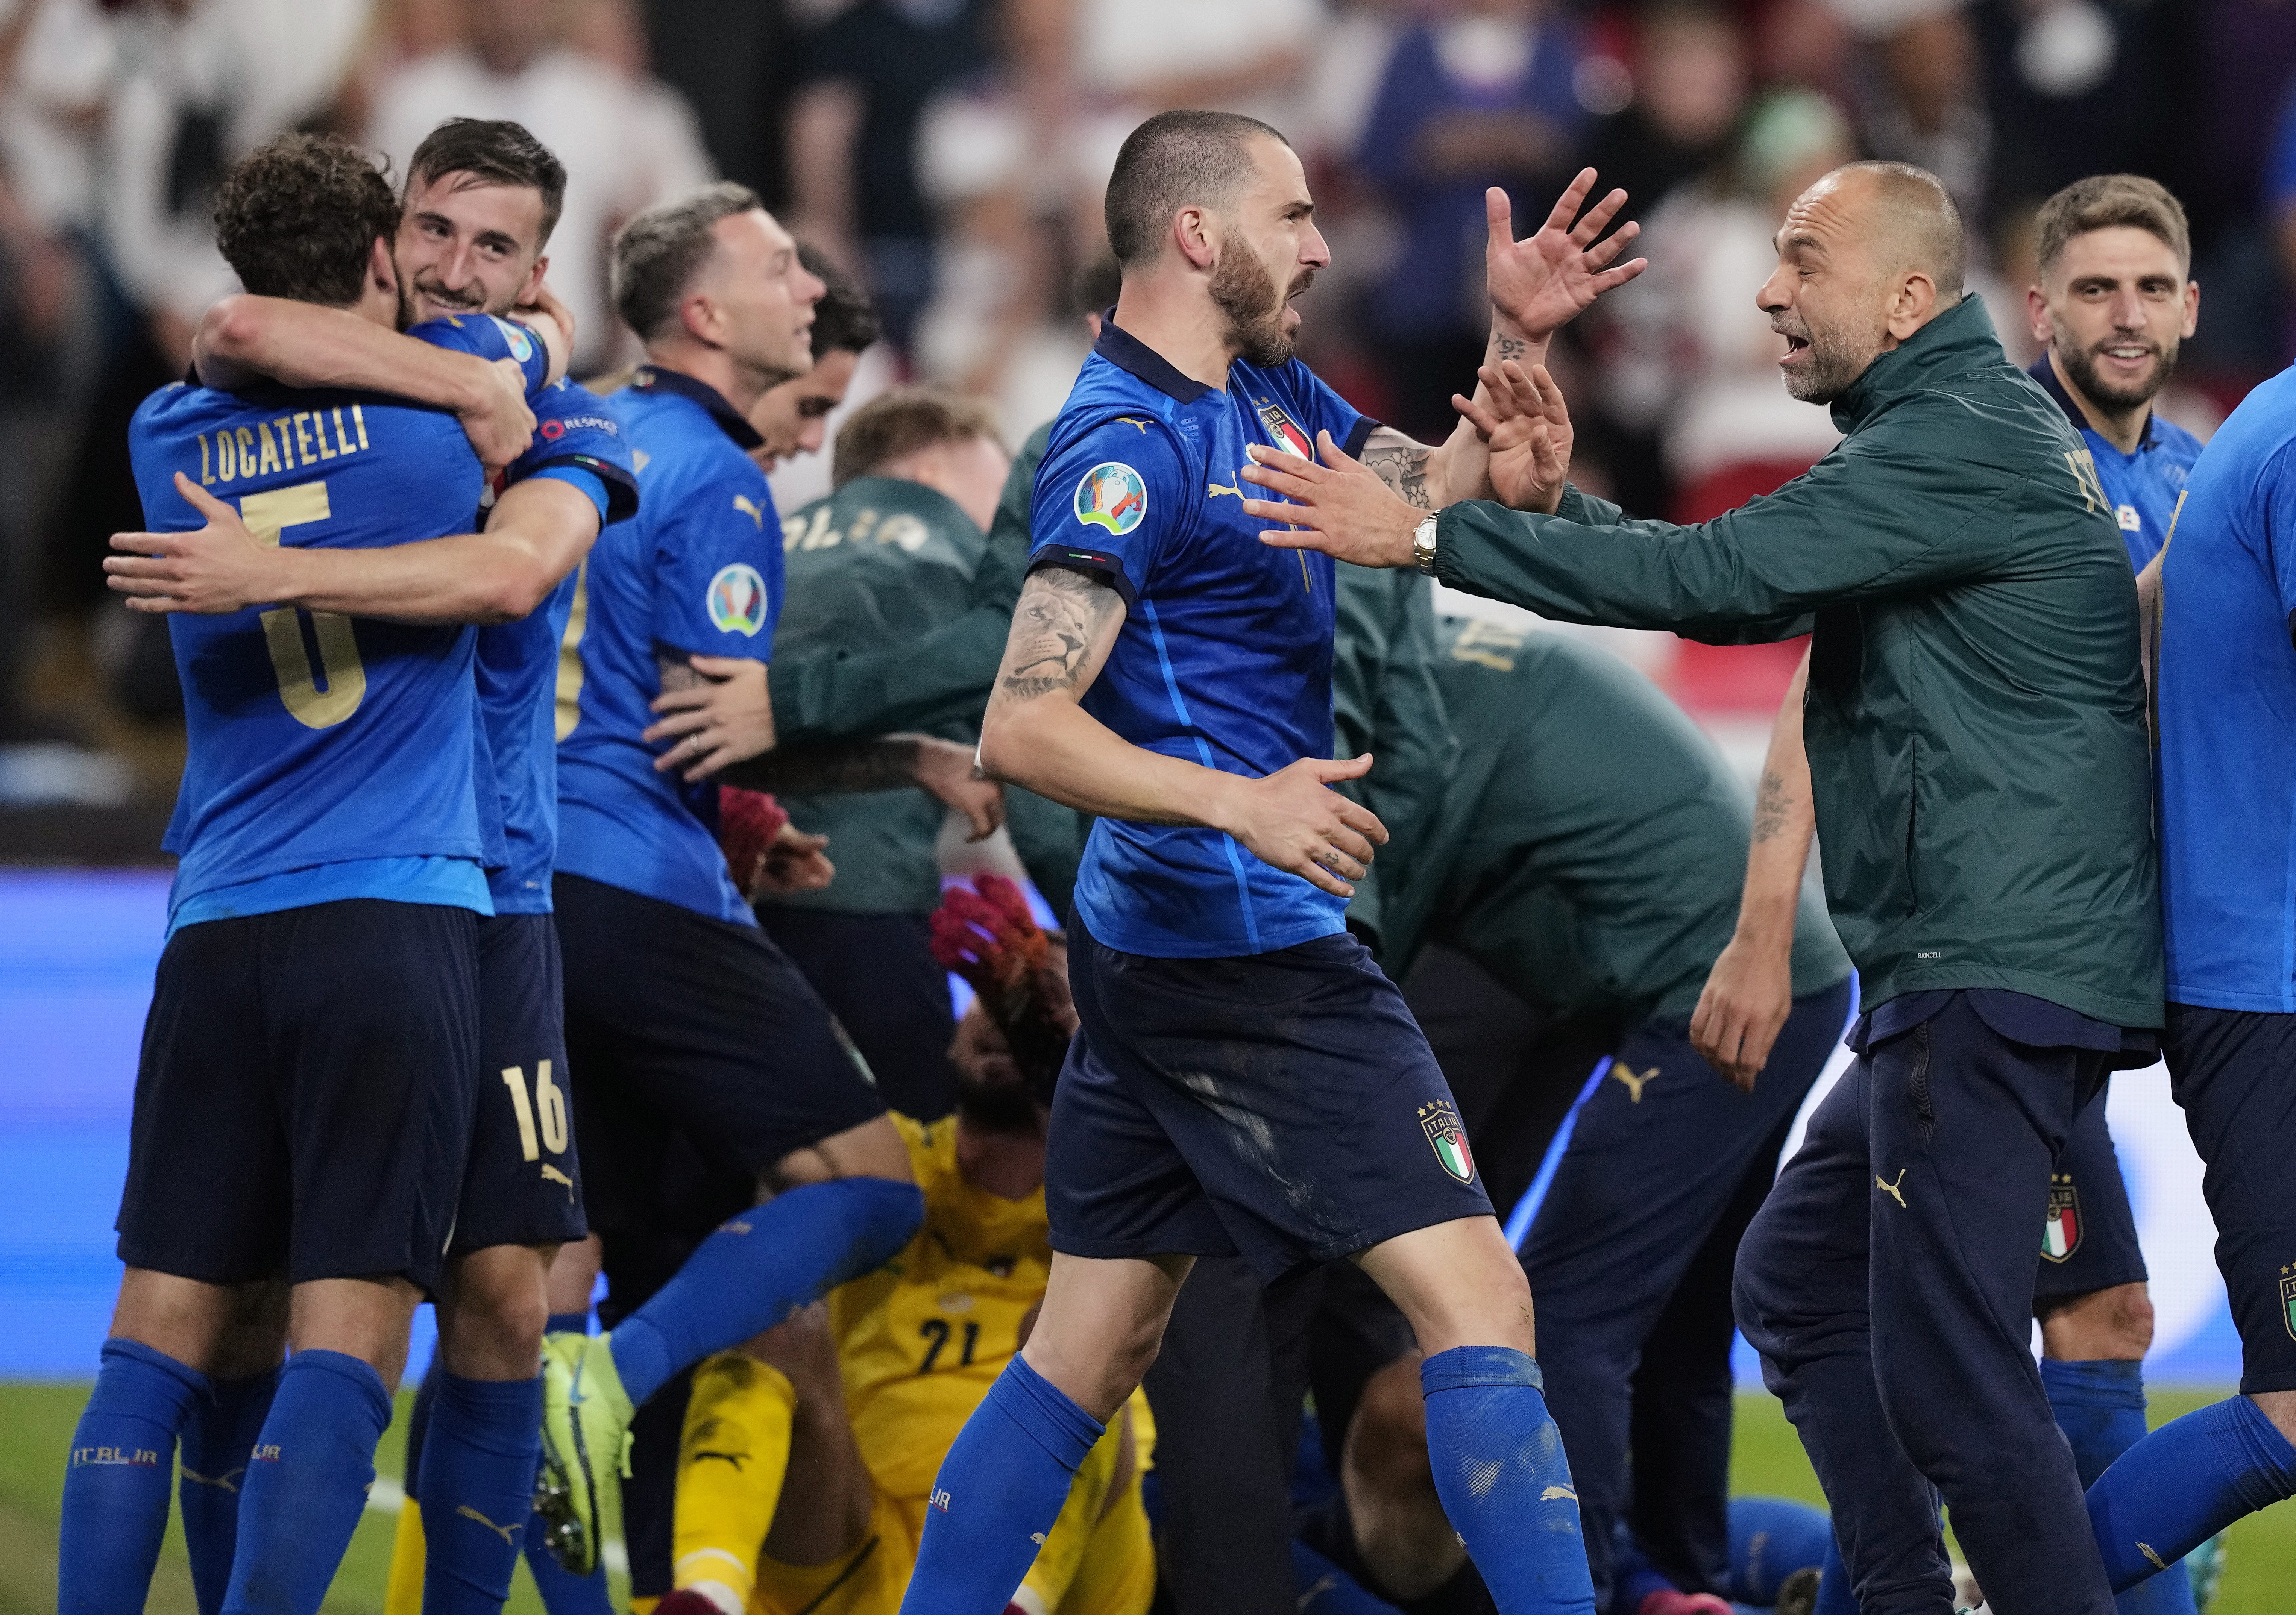 Soccer Football - Euro 2020 - Final - Italy v England - Wembley Stadium, London, Britain - July 11, 2021 Italy celebrate after winning Euro 2020 after a penalty shootout Pool via REUTERS/Frank Augstein